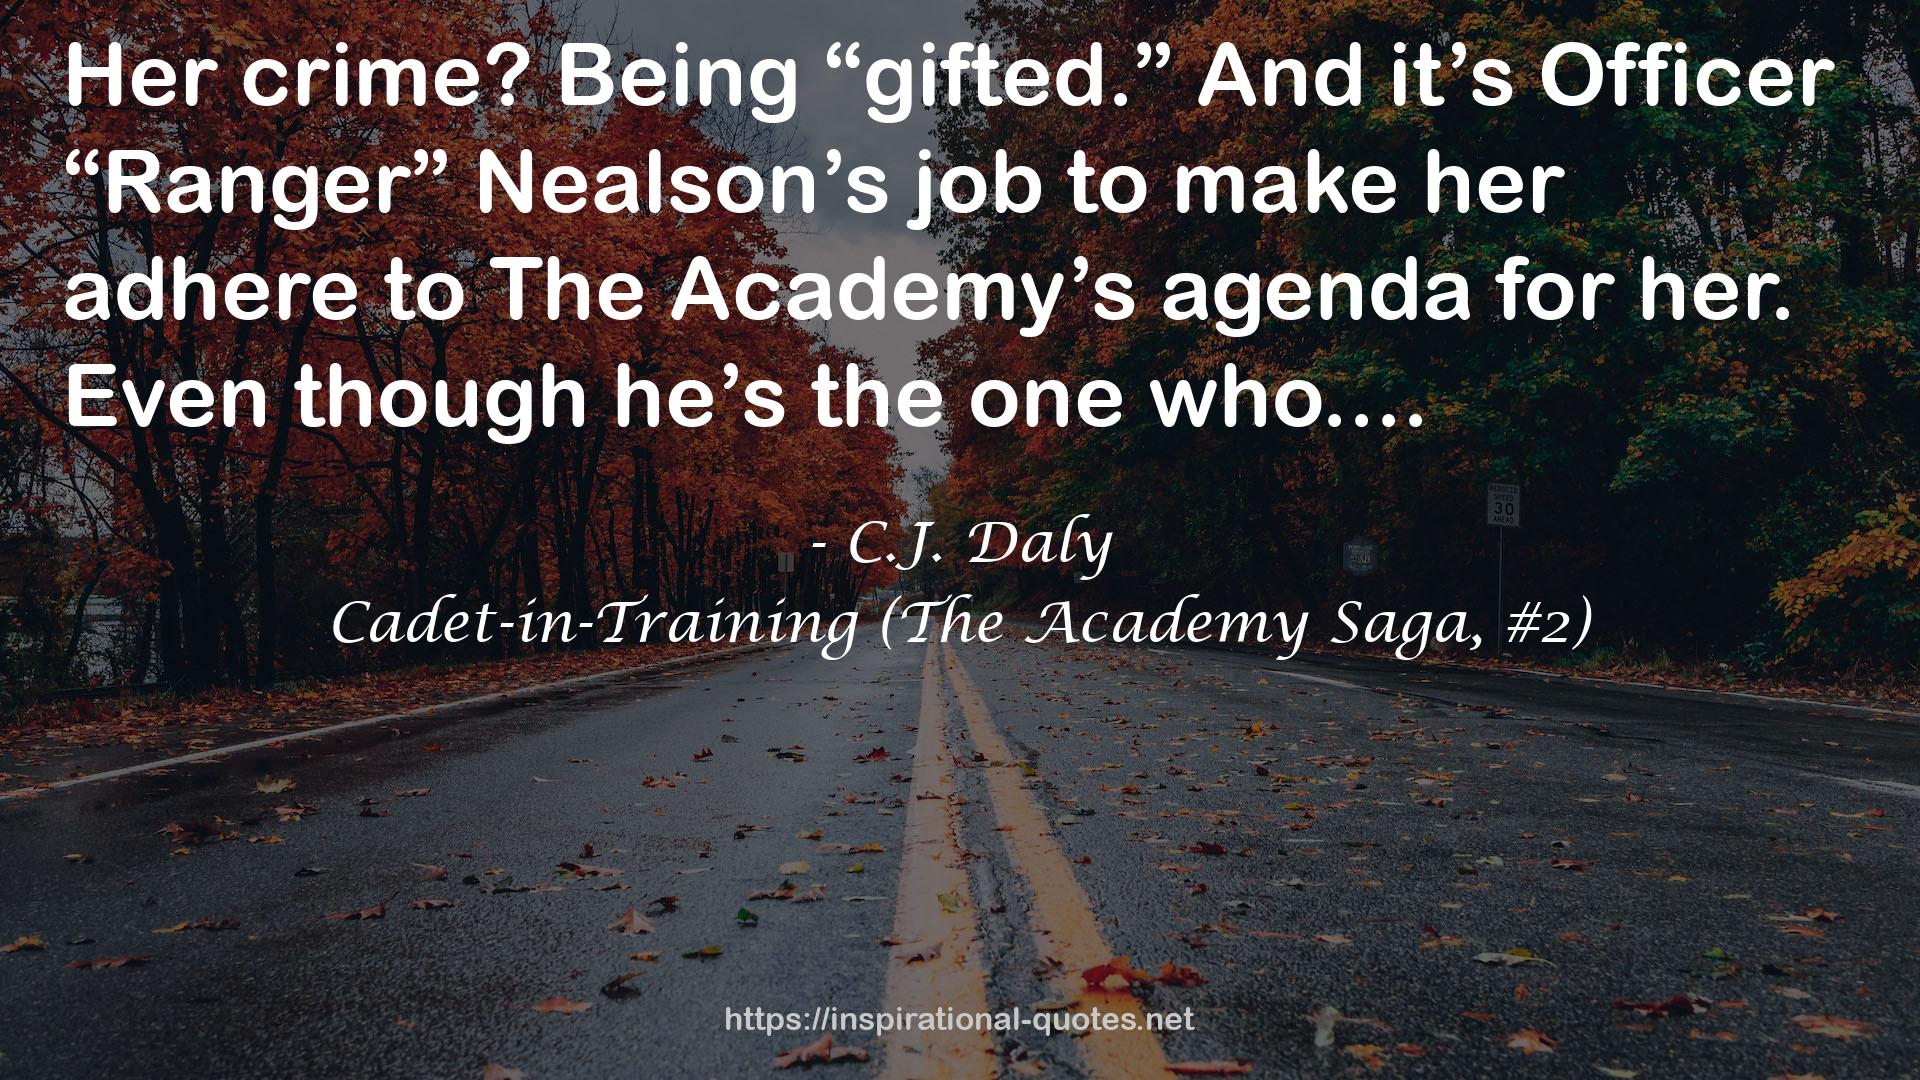 Cadet-in-Training (The Academy Saga, #2) QUOTES